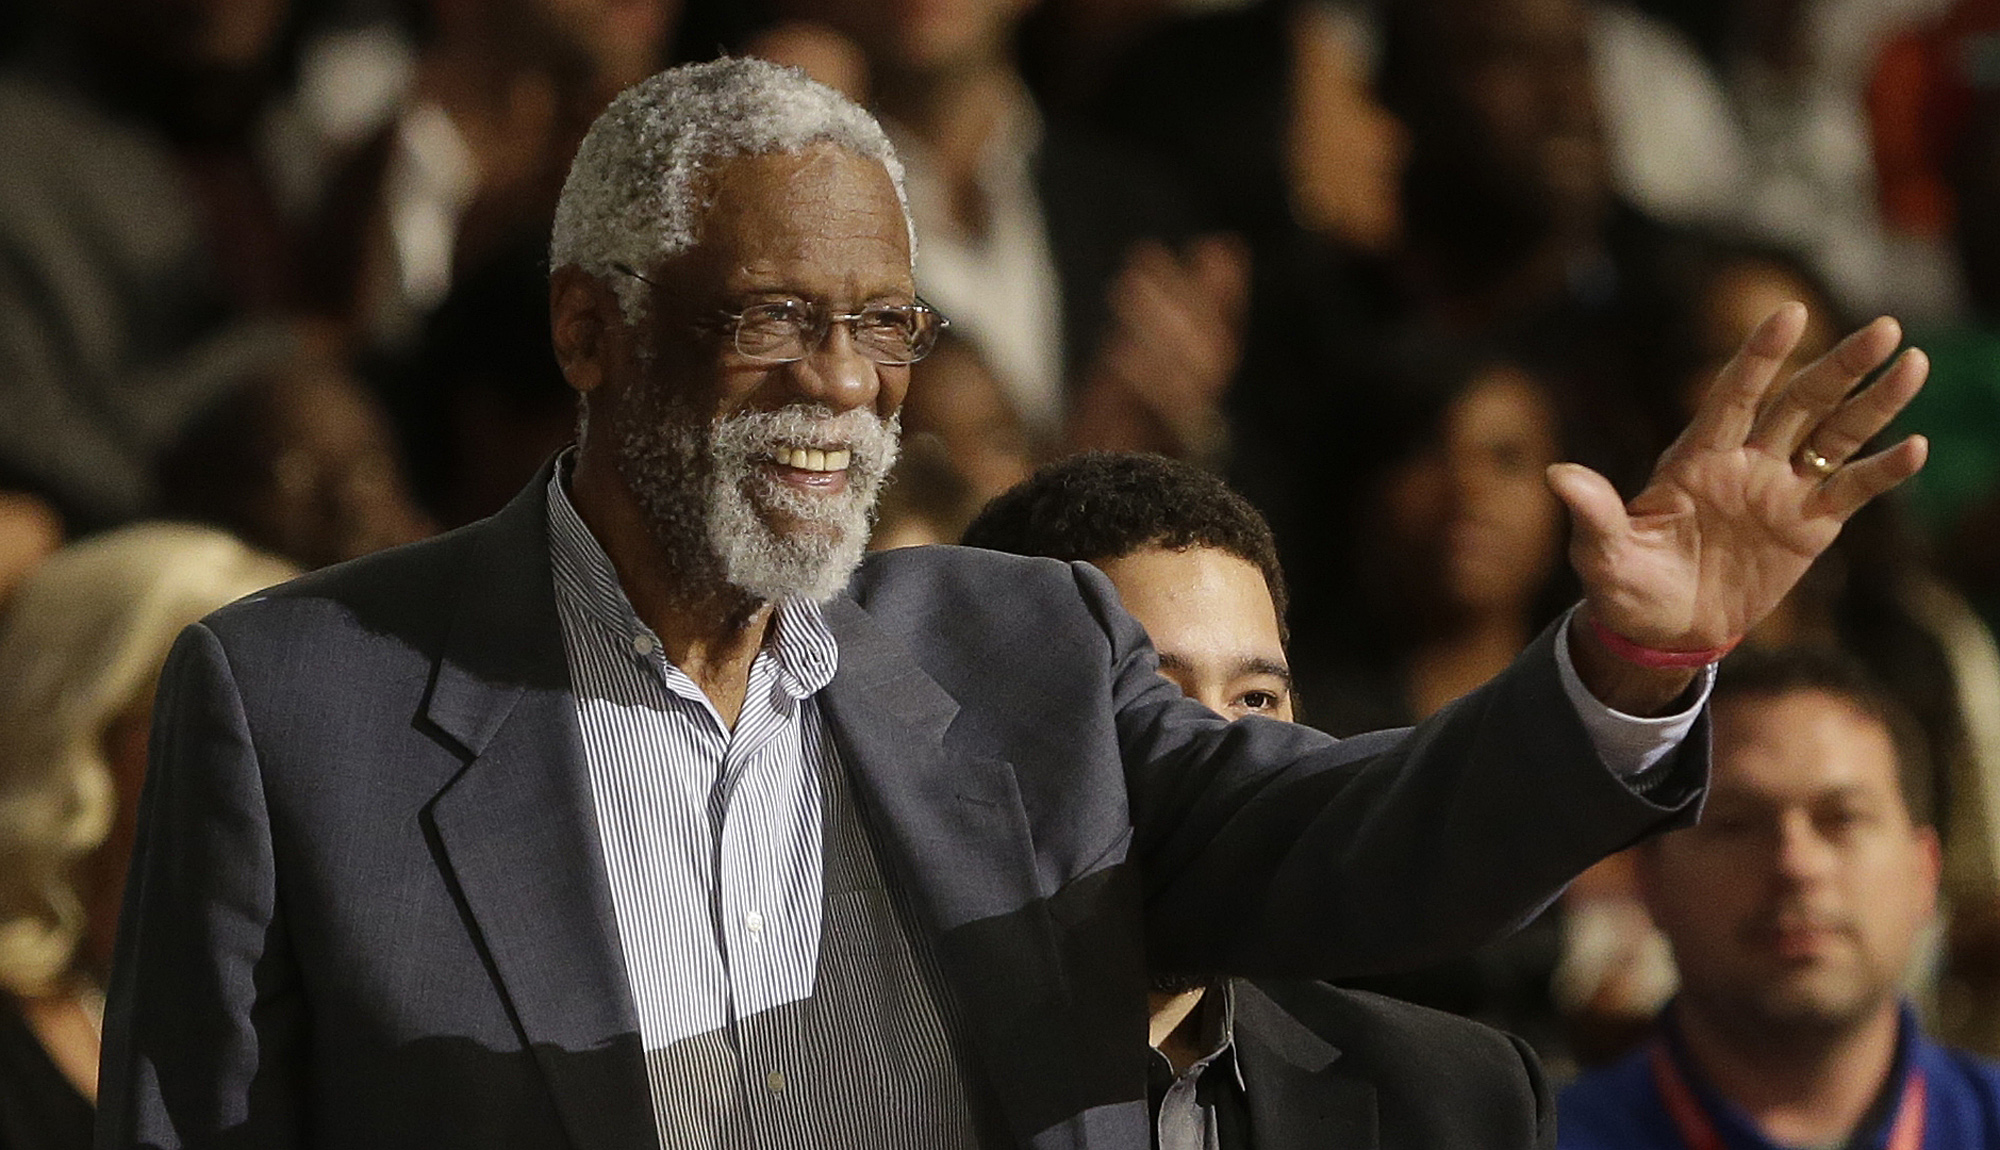 Former NBA player Bill Russell waves to the crowd during the NBA All Star basketball game, Sunday, Feb. 16, 2014, in New Orleans. (Image: AP Photo/Gerald Herbert)